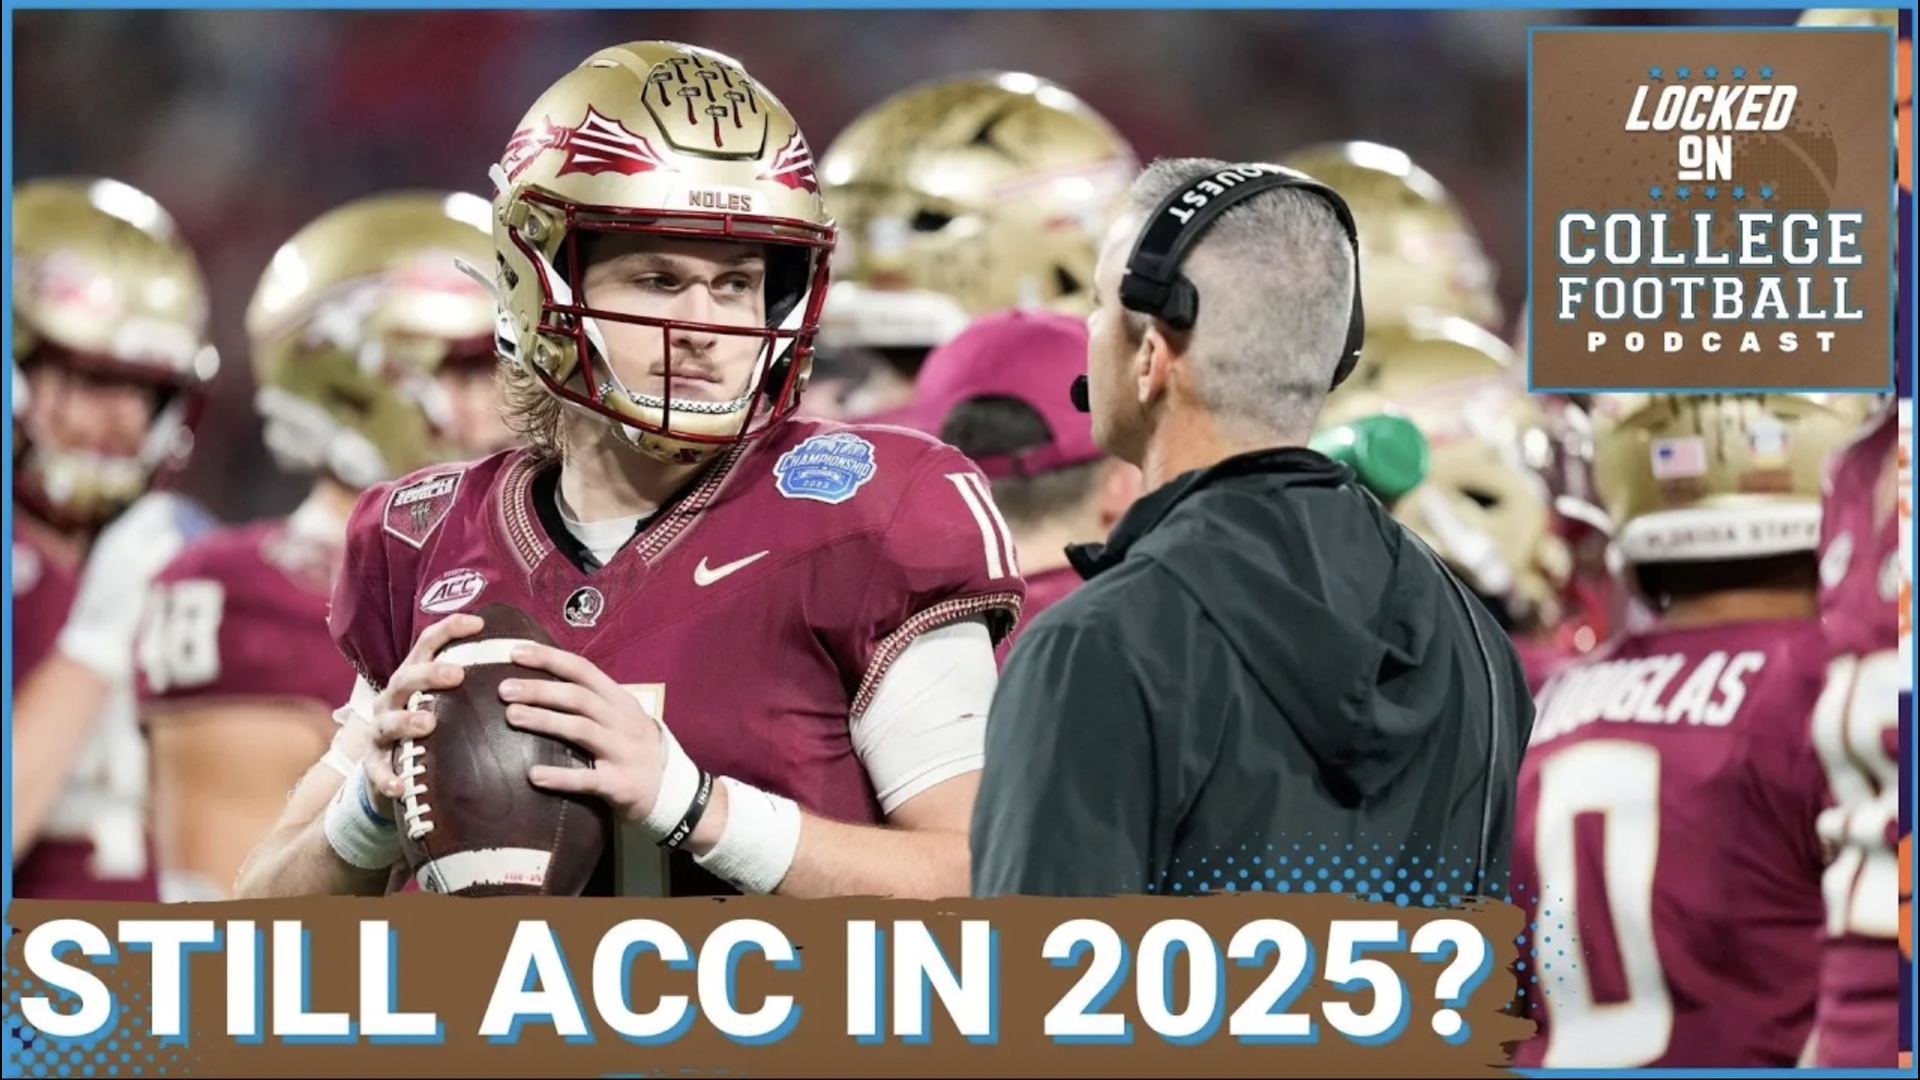 Florida State's lawsuit against the ACC (and their counter lawsuit) is going to drag on beyond 2024. 'Locked On ACC' host Kenton Gibbs joins the show